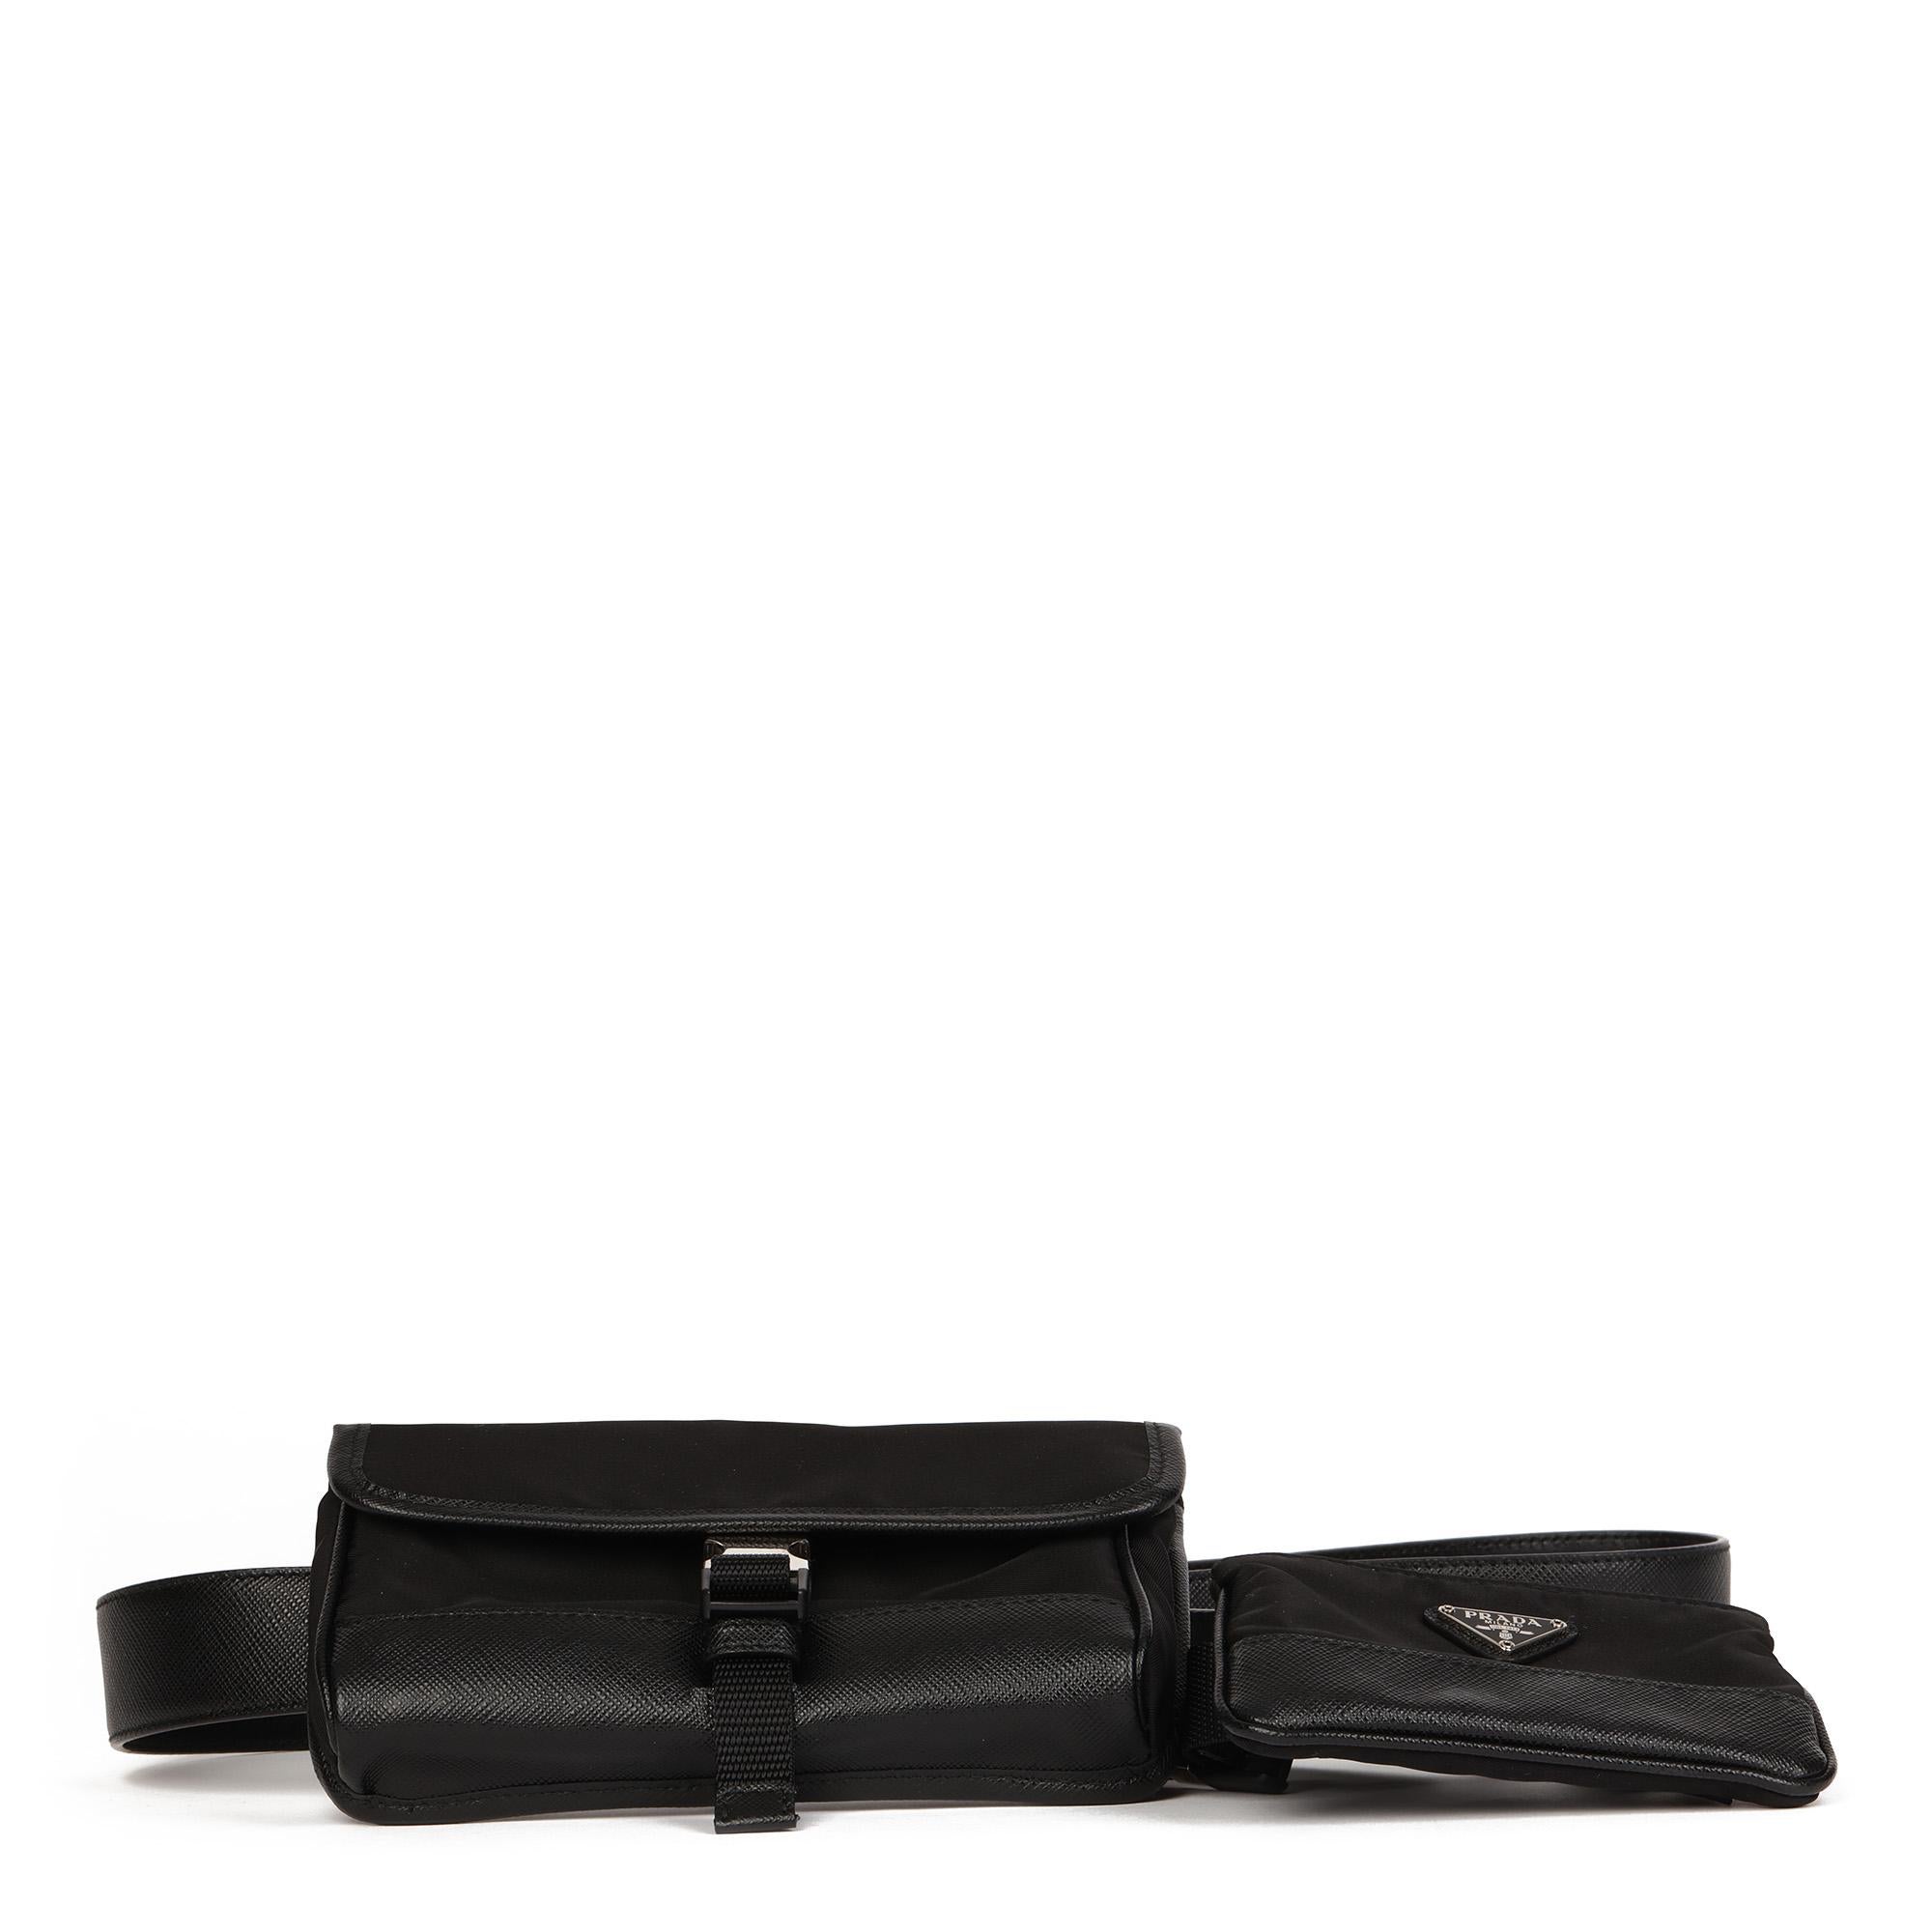 PRADA
Black Nylon & Saffiano Leather Pocket Belt Bag

Age (Circa): 2010
Accompanied By: Tag, Key Ring
Authenticity Details: Serial Tag (Made in Italy)
Gender: Unisex
Type: Belt Bag

Colour: Black
Hardware: Silver
Material(s): Nylon, Saffiano